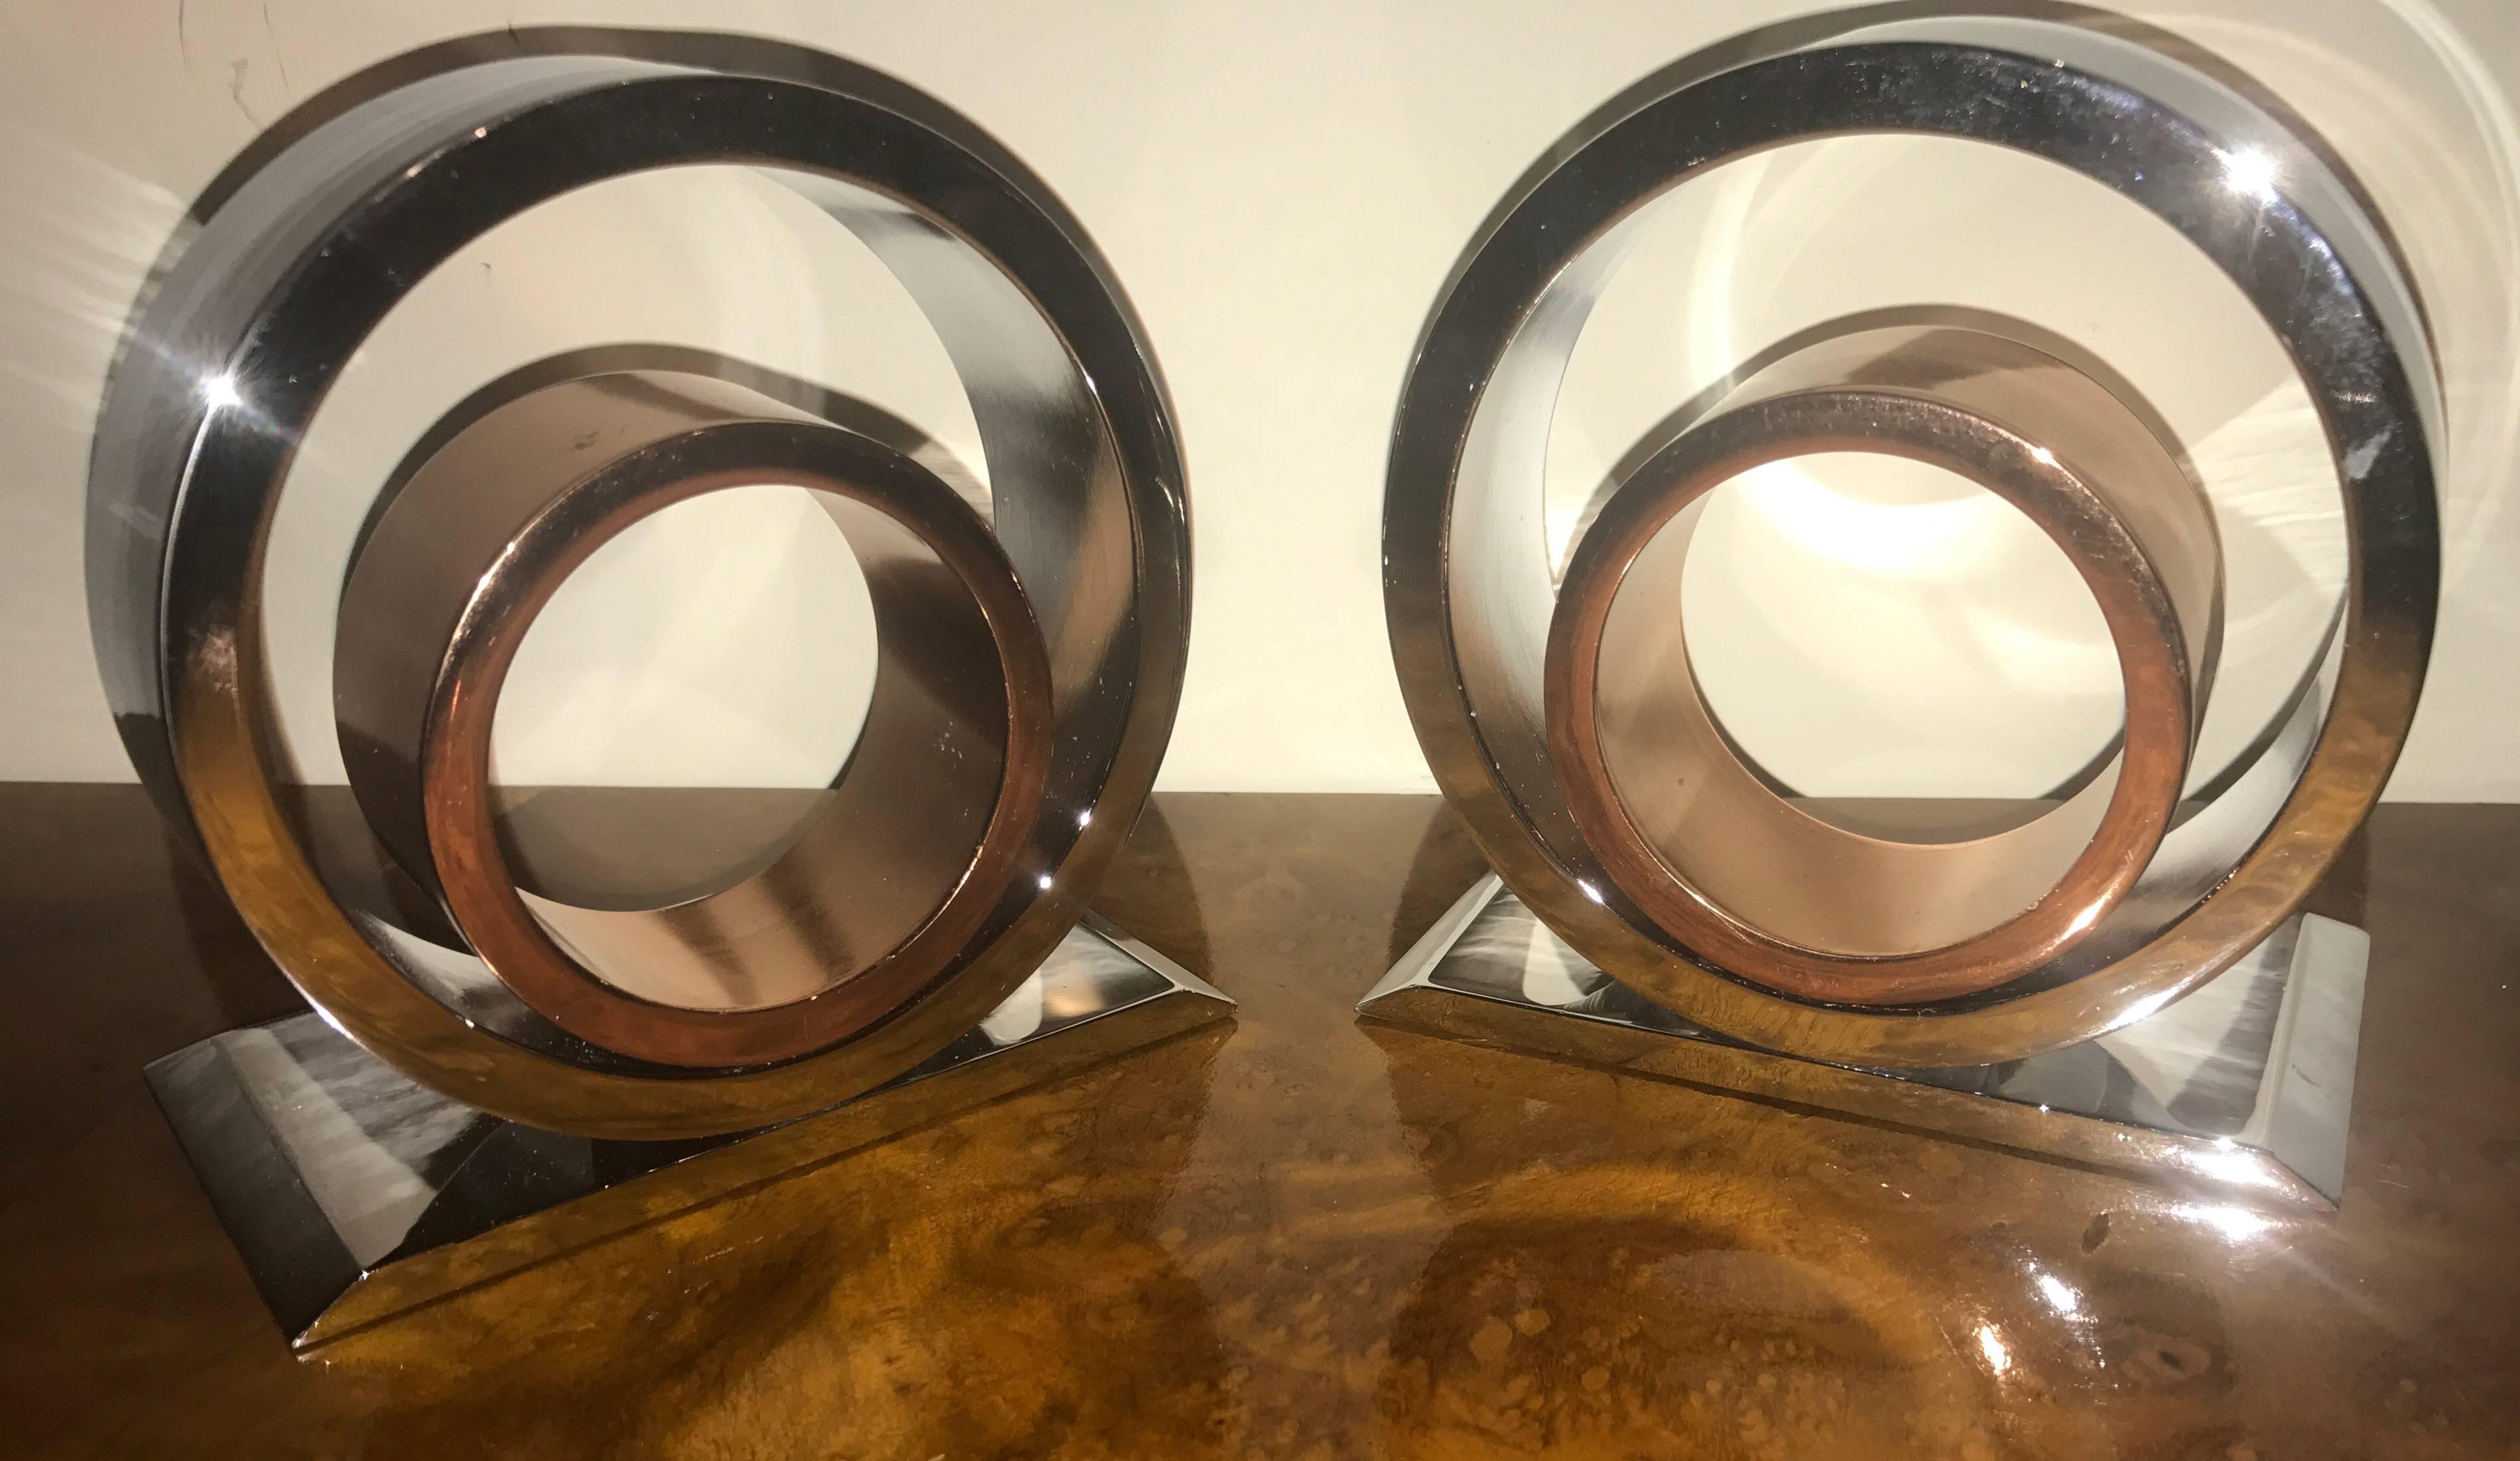 Vintage High quality modernist bookends in the style of Chase by Walter Von Nessen. Shiny polished chrome and copper very thick and heavy construction. Metal sculpture, period Art Deco Industrial design.